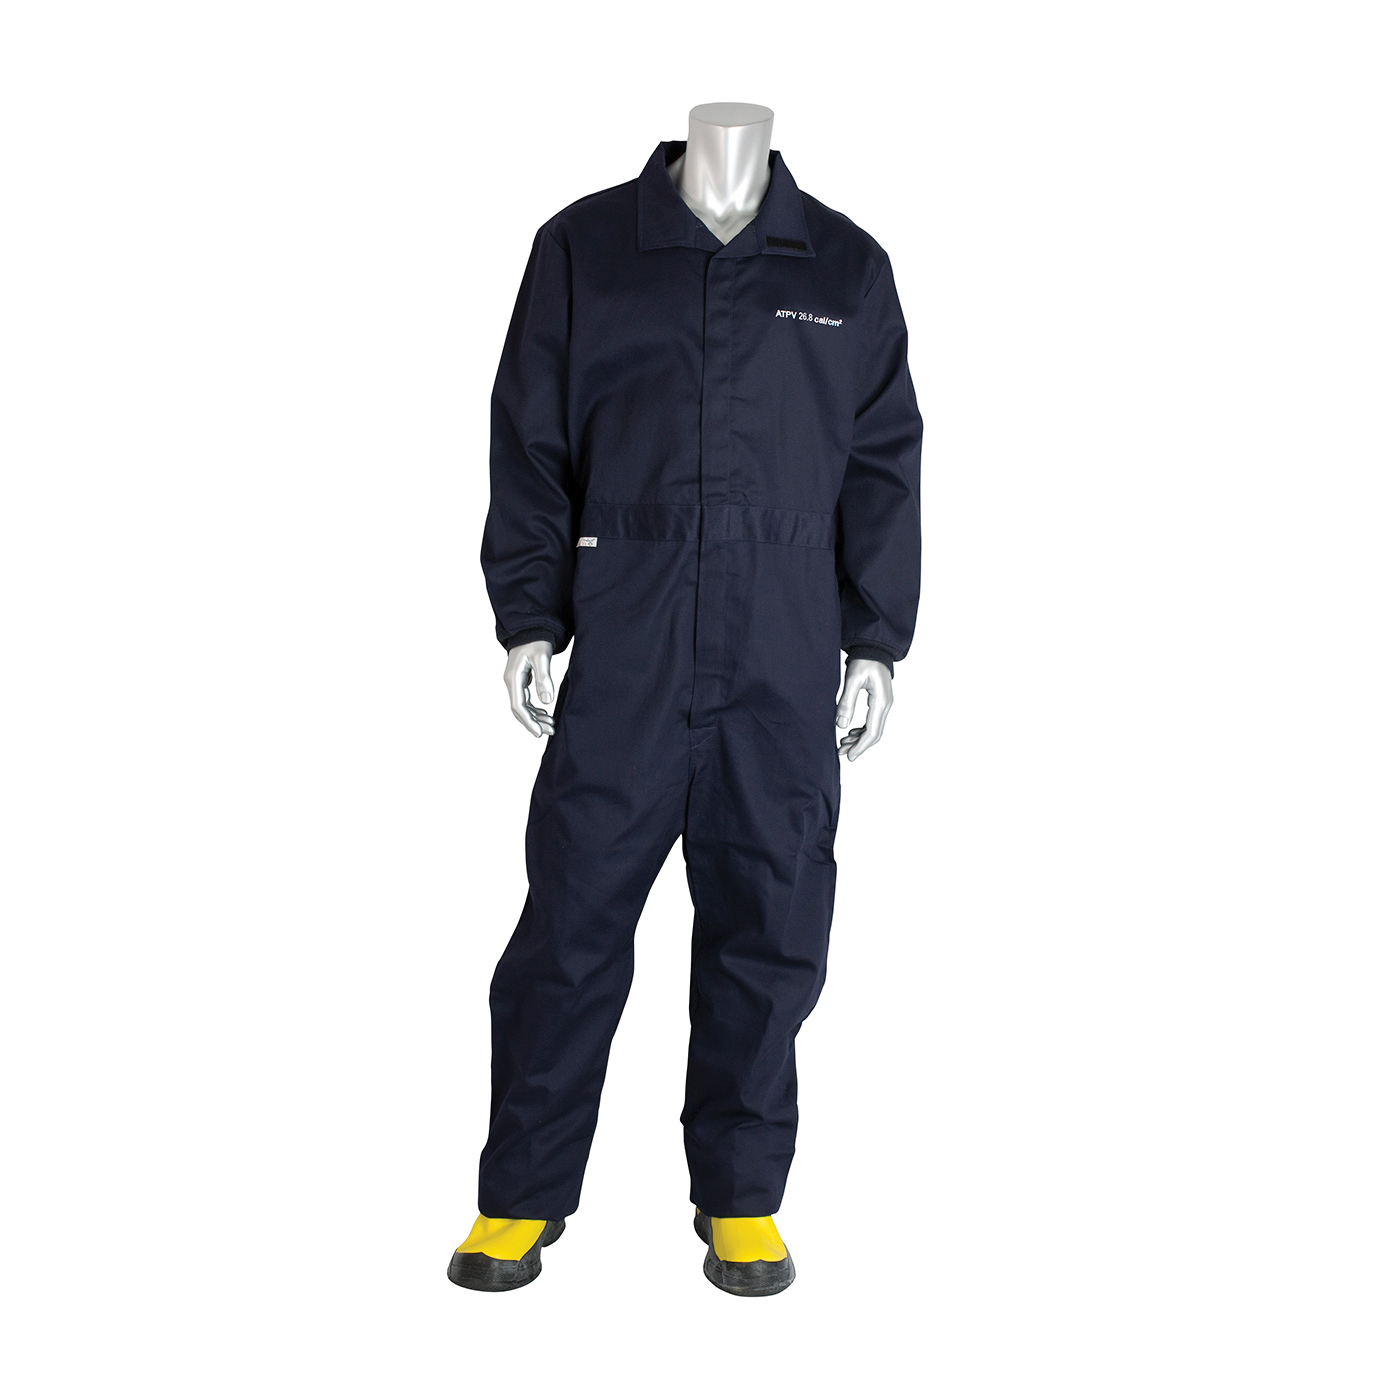 PIP® 9100-52772/M Flame Resistant Coverall, M, Navy, Westex® Ultra Soft®/88% Cotton/12% Nylon, 40 to 42 in Chest, 32 in L Inseam